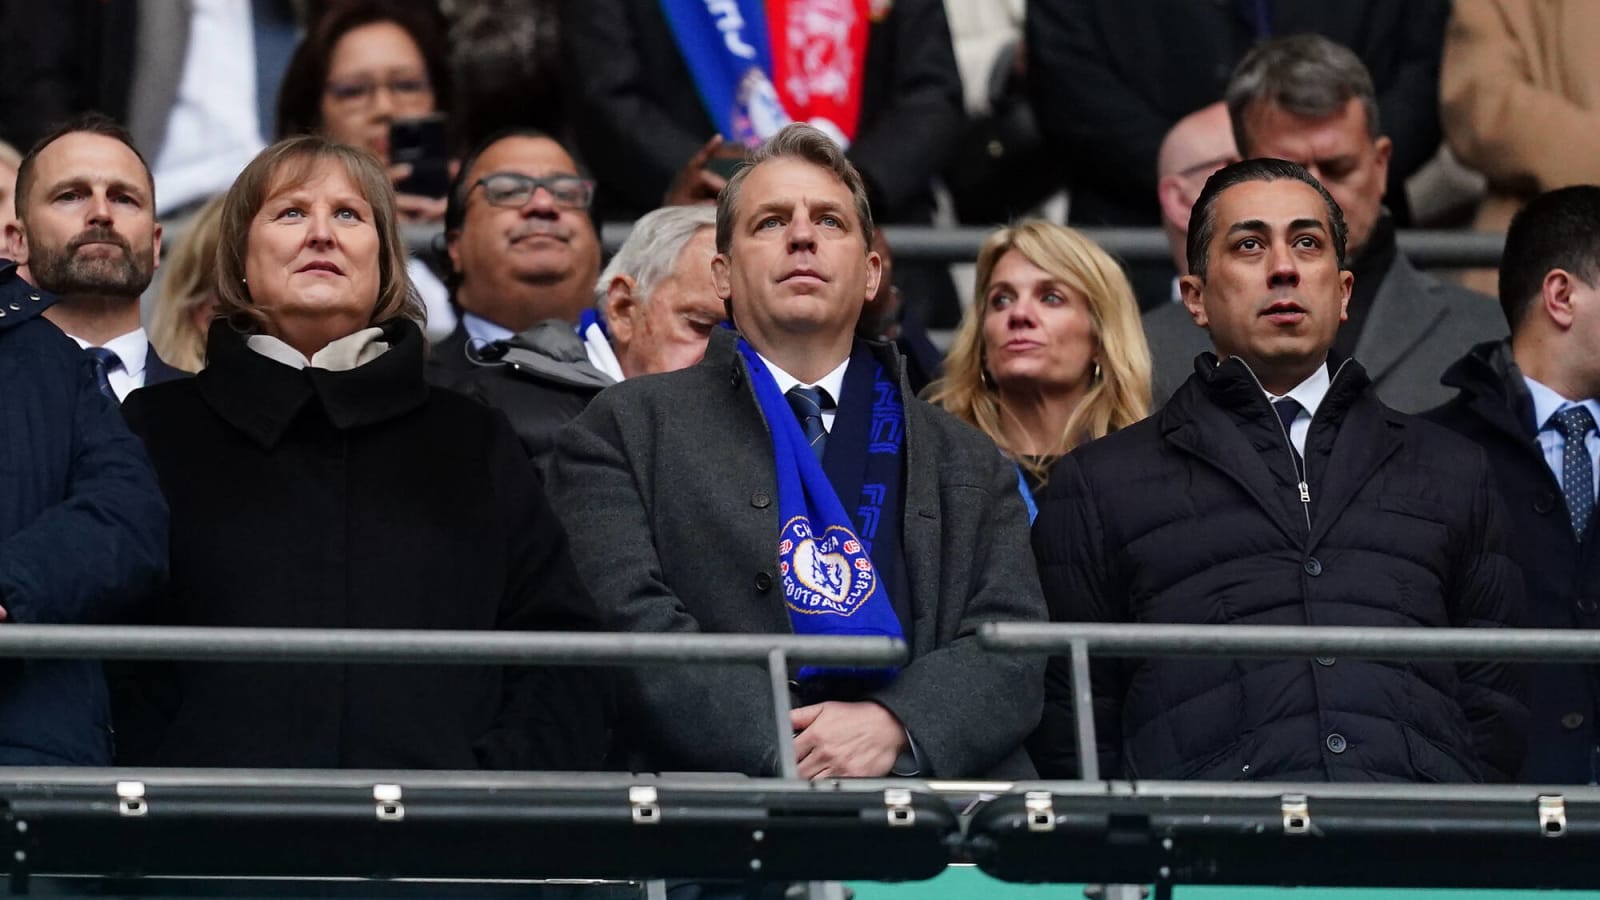 Chelsea owner says 'winning is at the top of the things that’s most important'